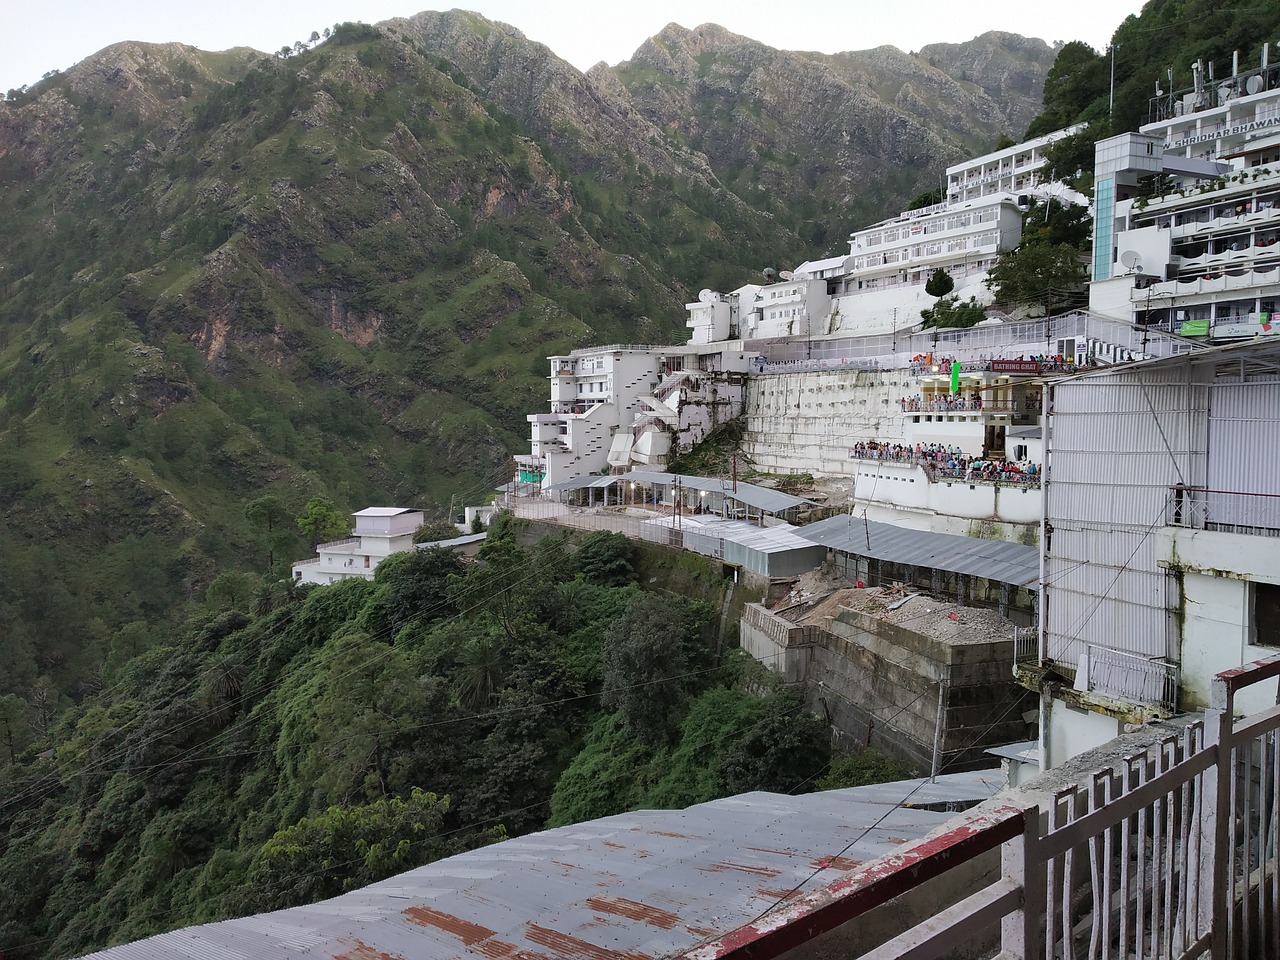 Spiritual Journey in the Himalayas: Vaishno Devi and Beyond